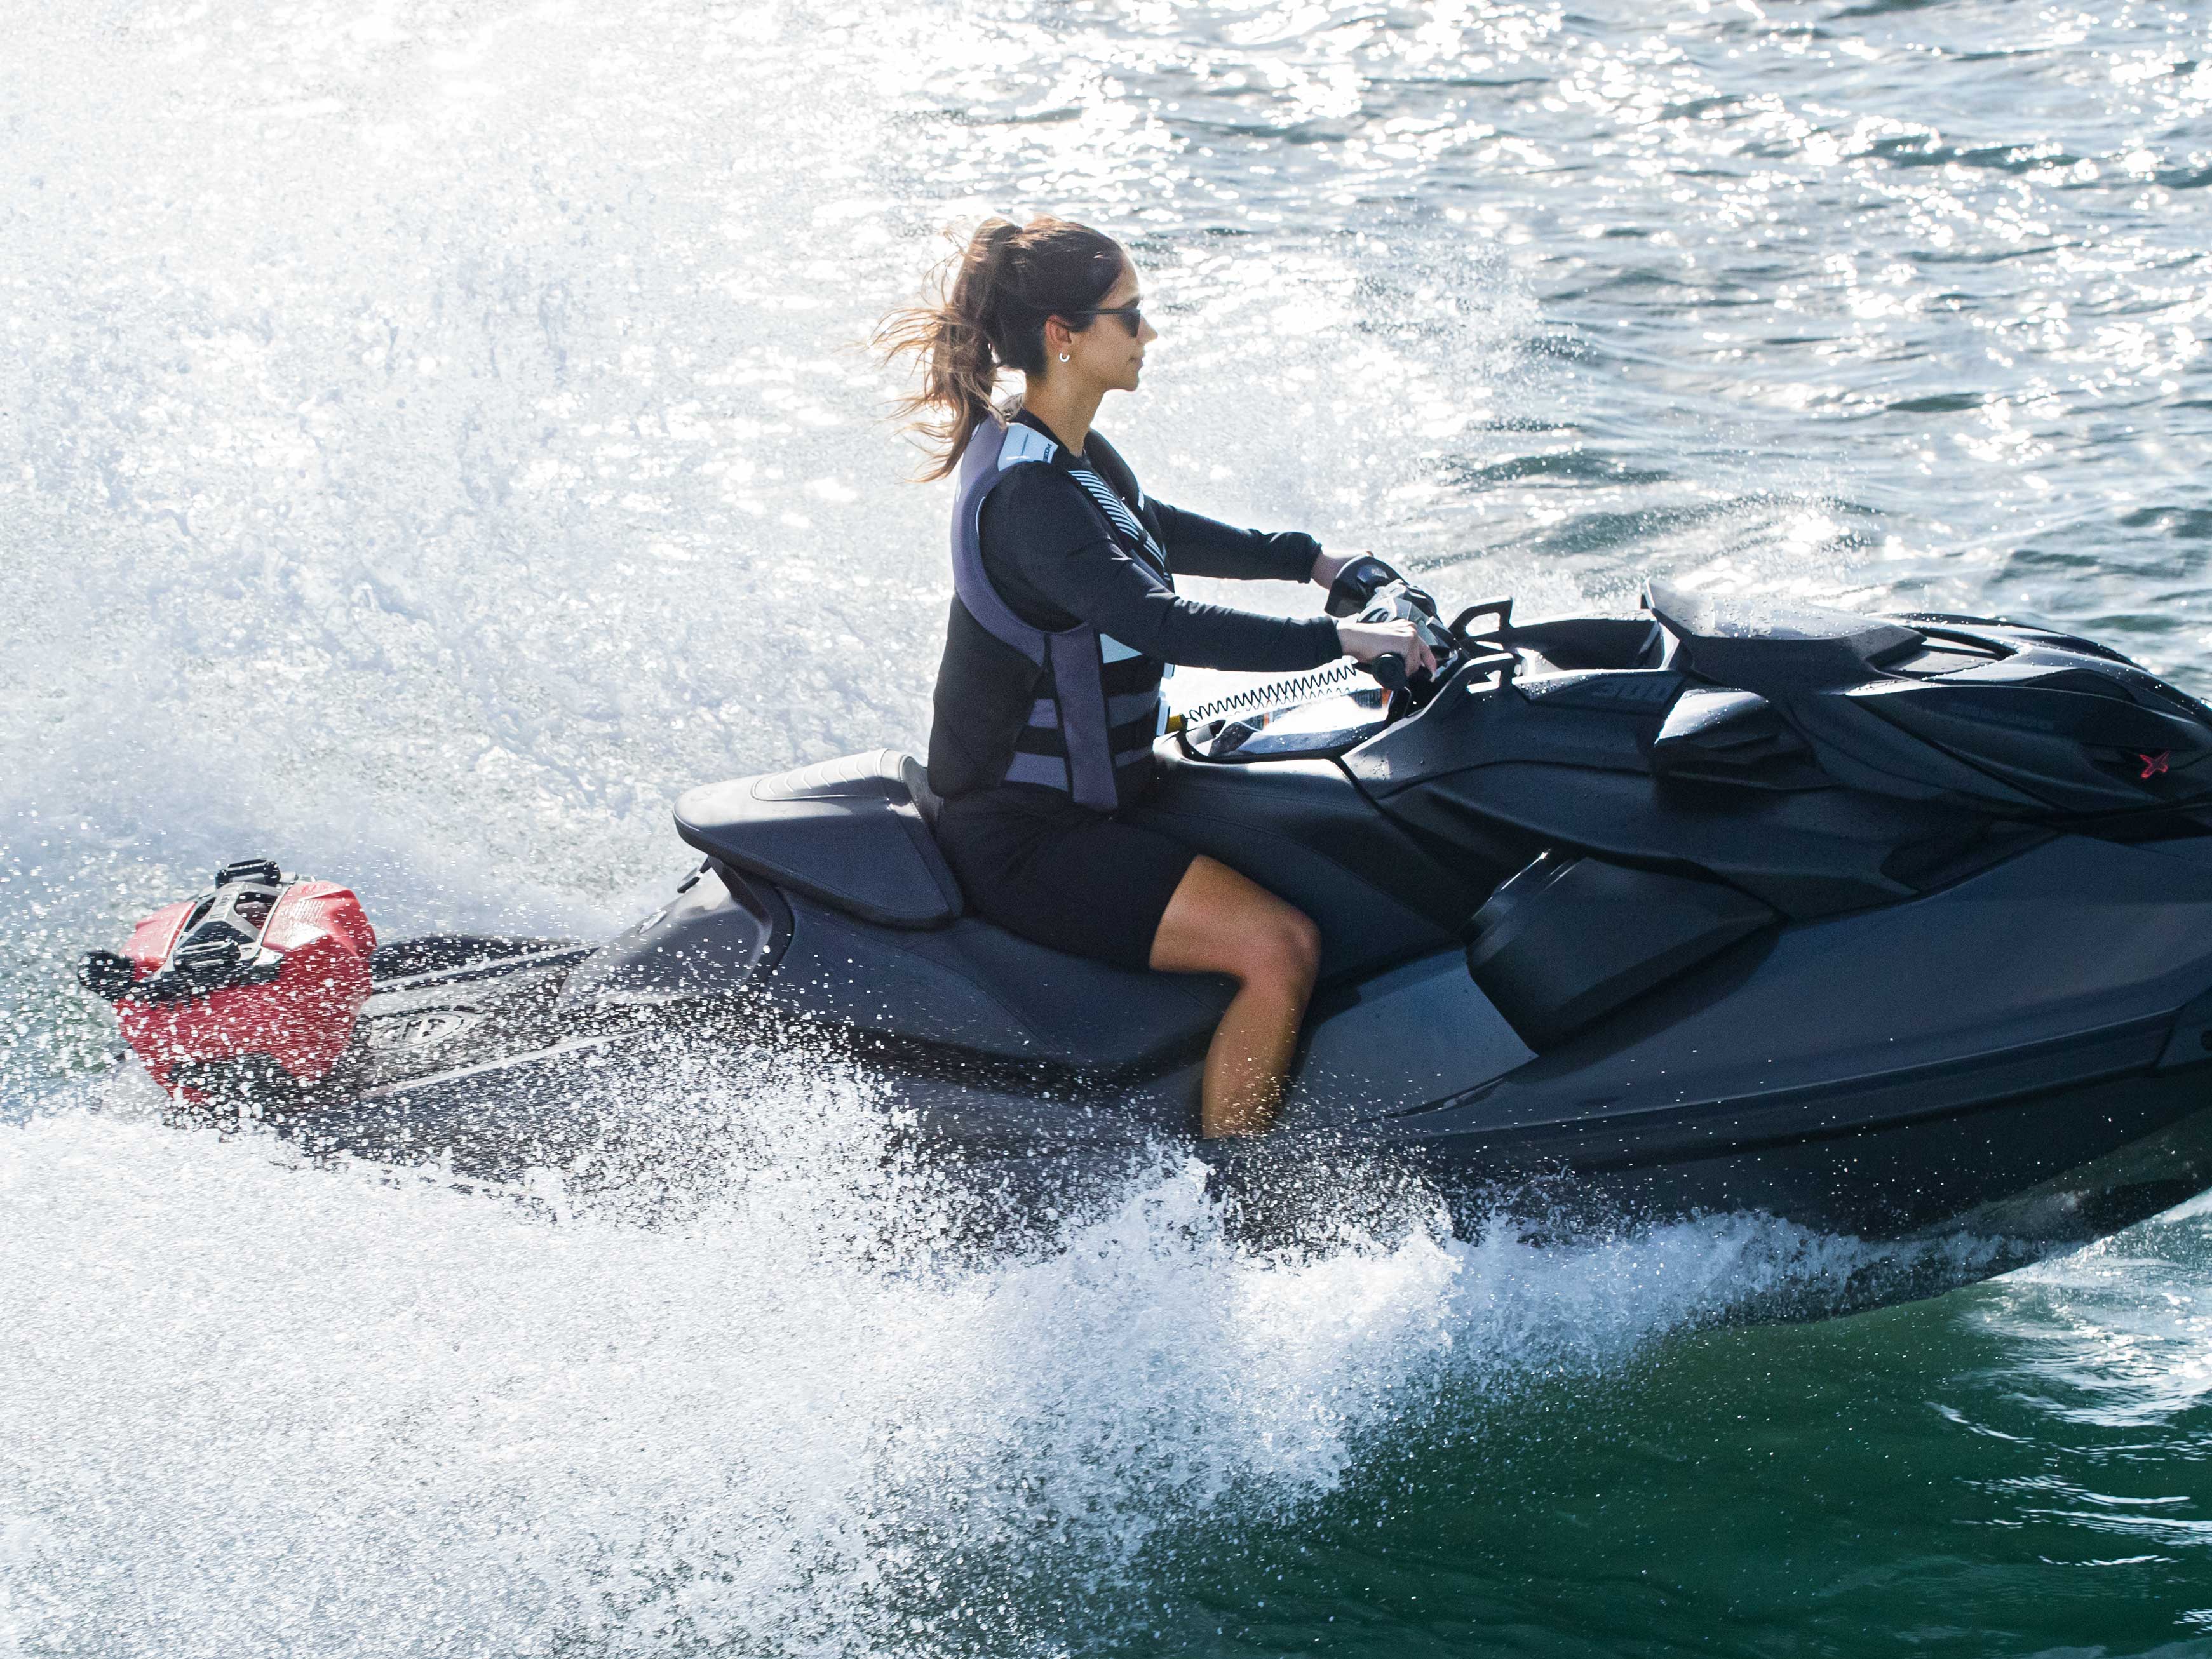 Woman riding a Sea-Doo RXP-X with a LinQ Fuel Caddy